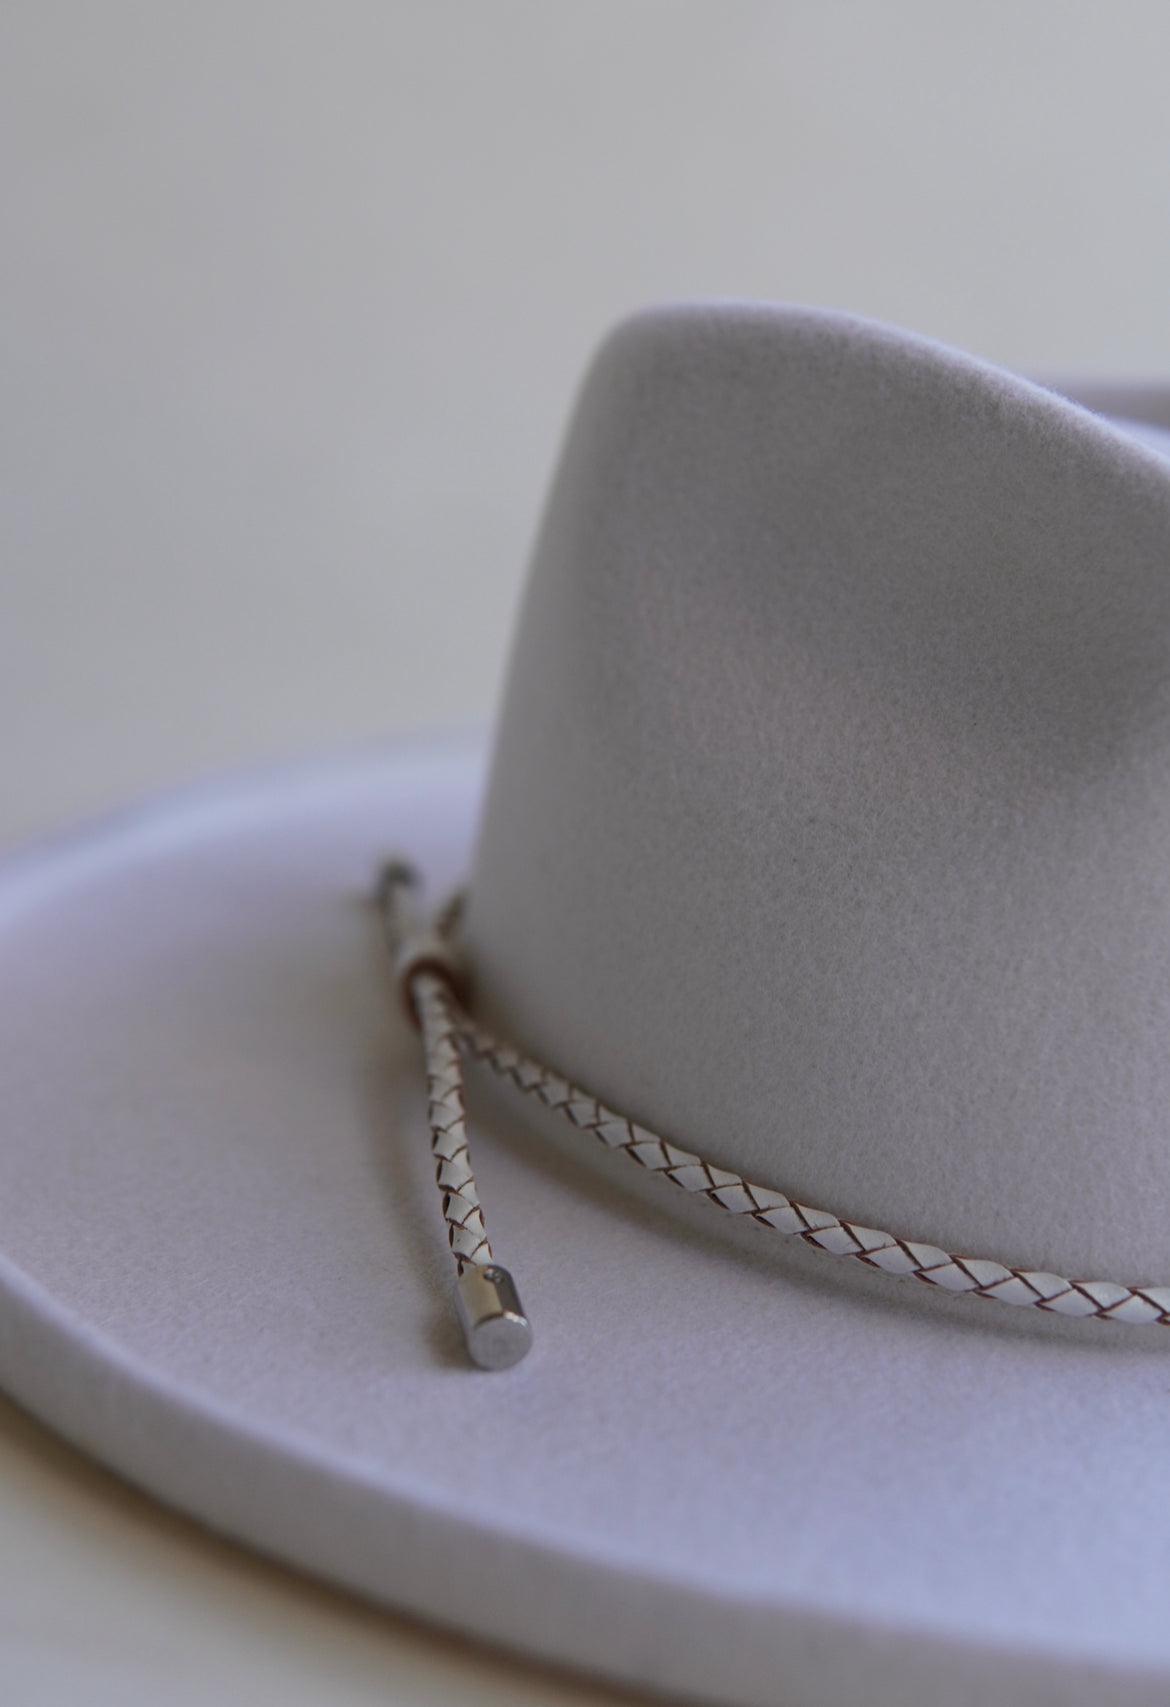 Braided Leather Hat Band: North Star Leather Co.